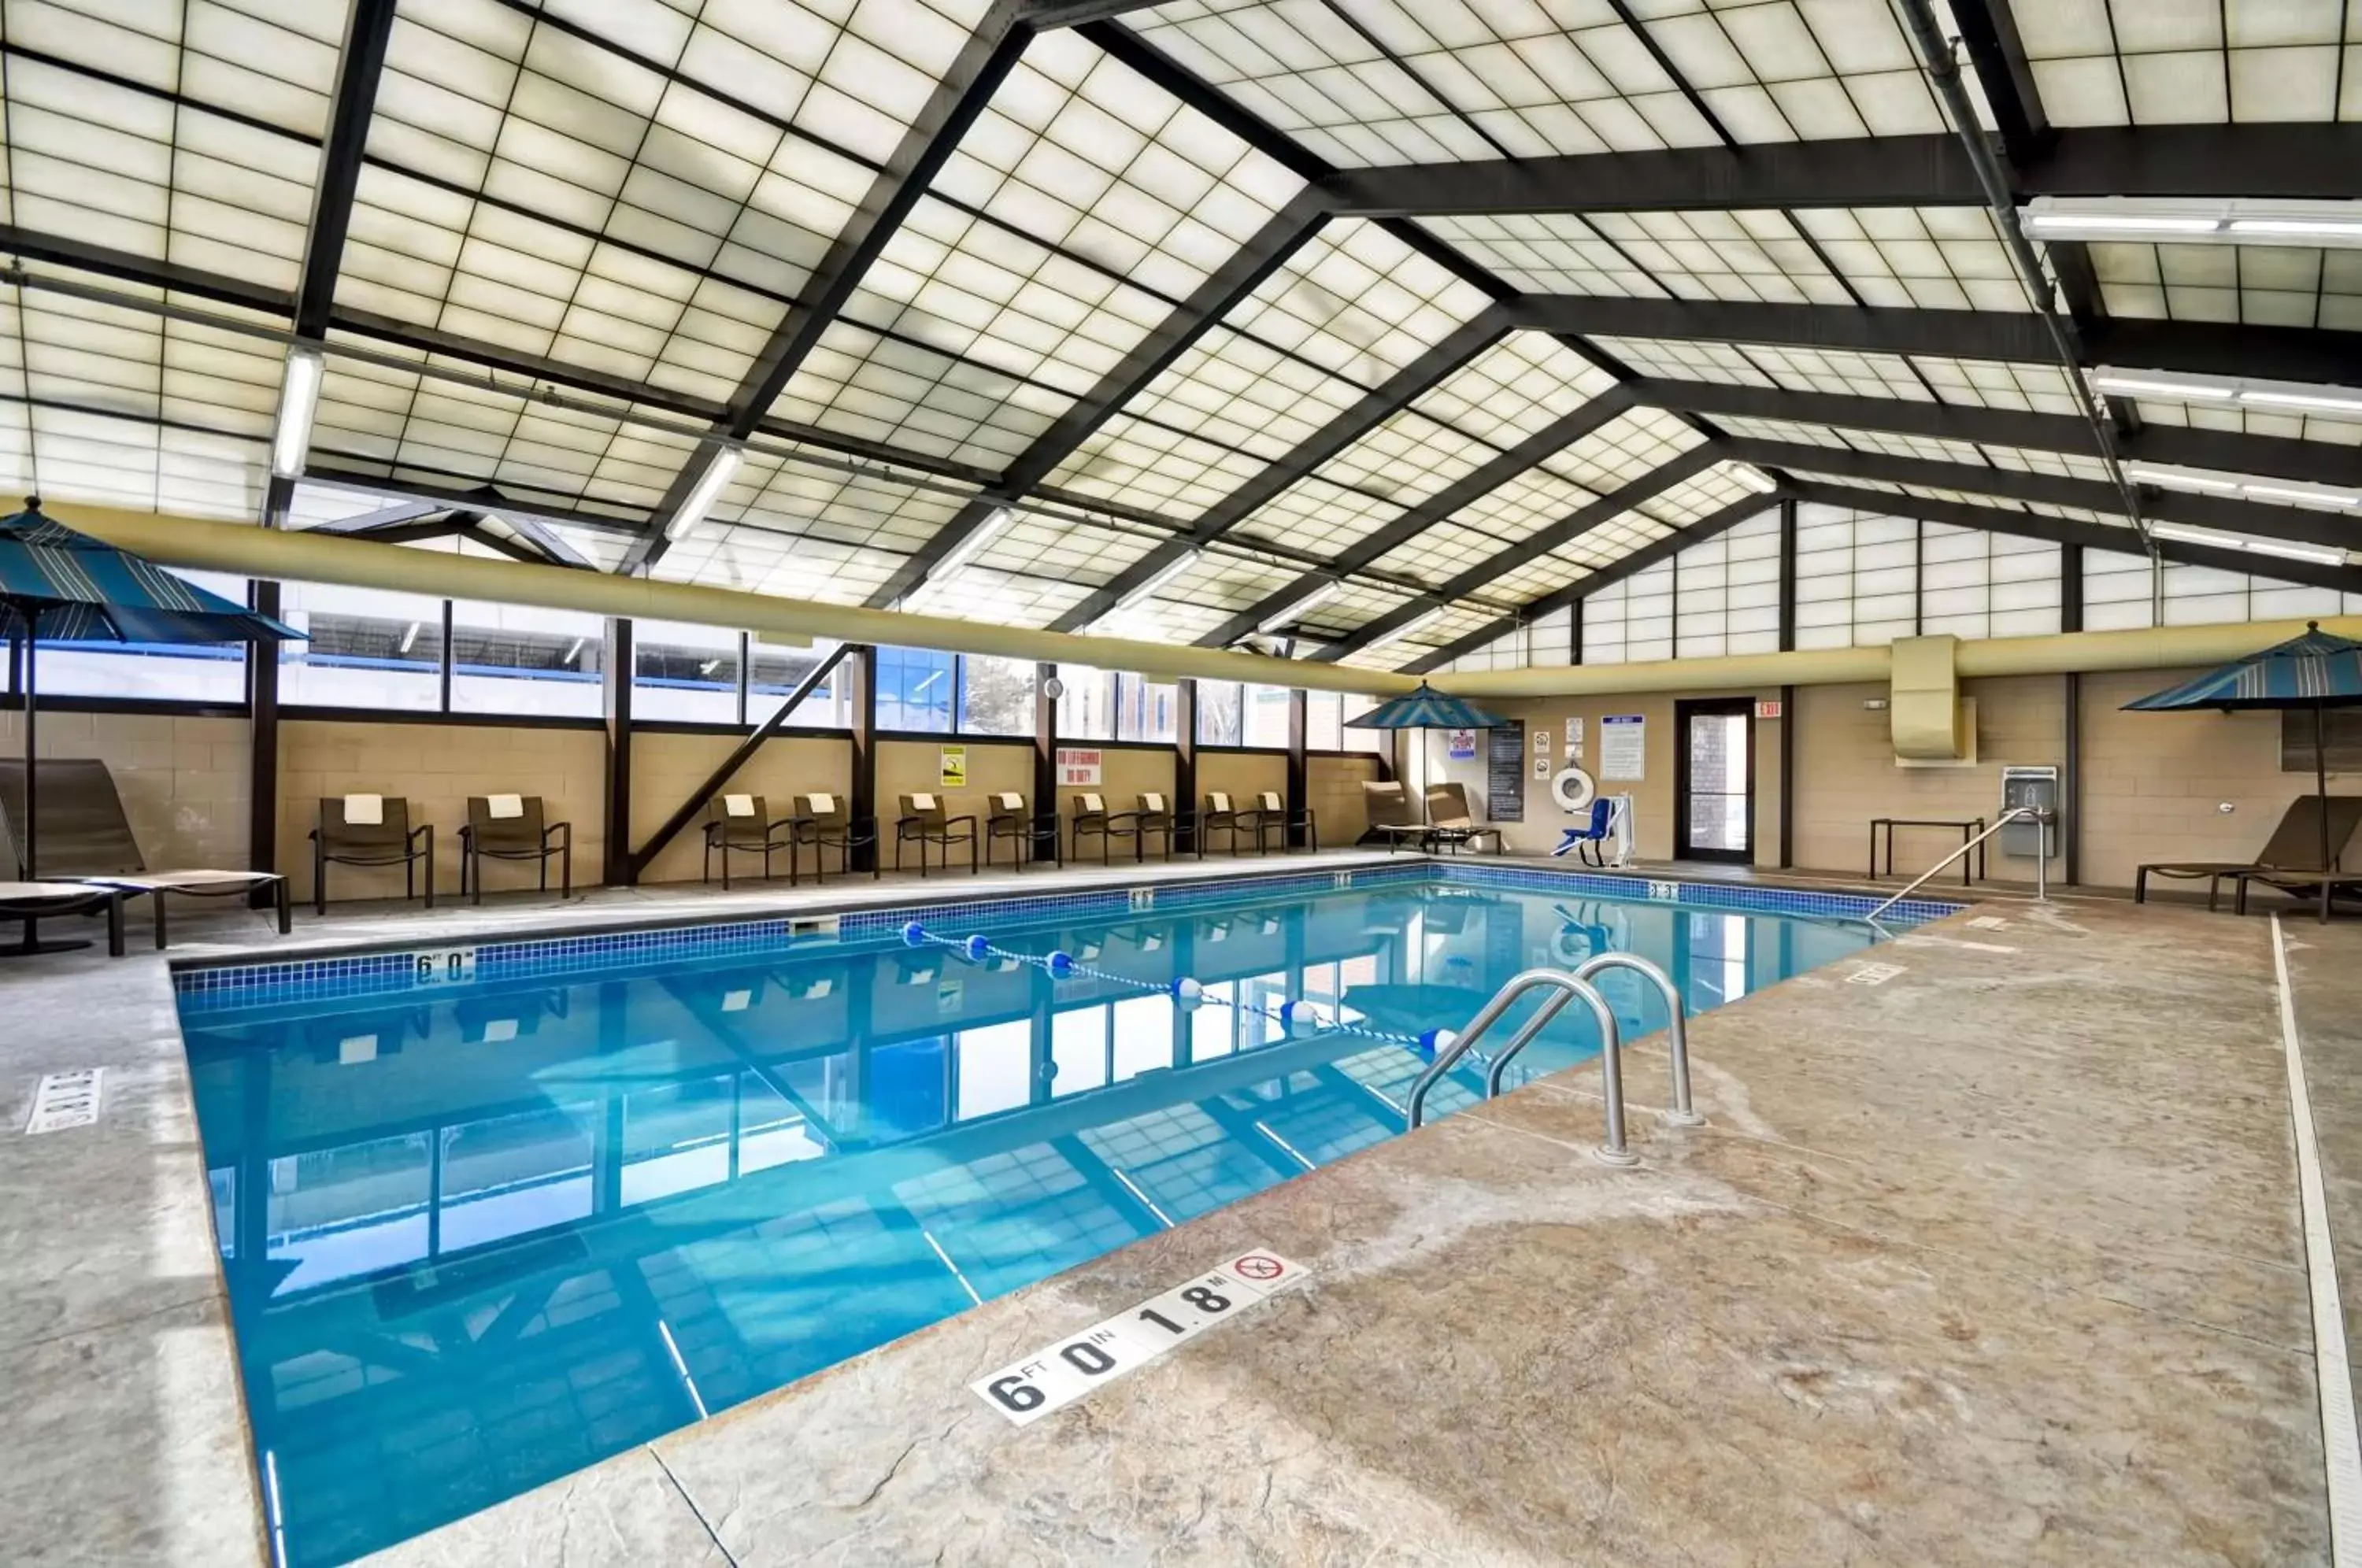 On site, Swimming Pool in Hyatt Place Minneapolis Airport South